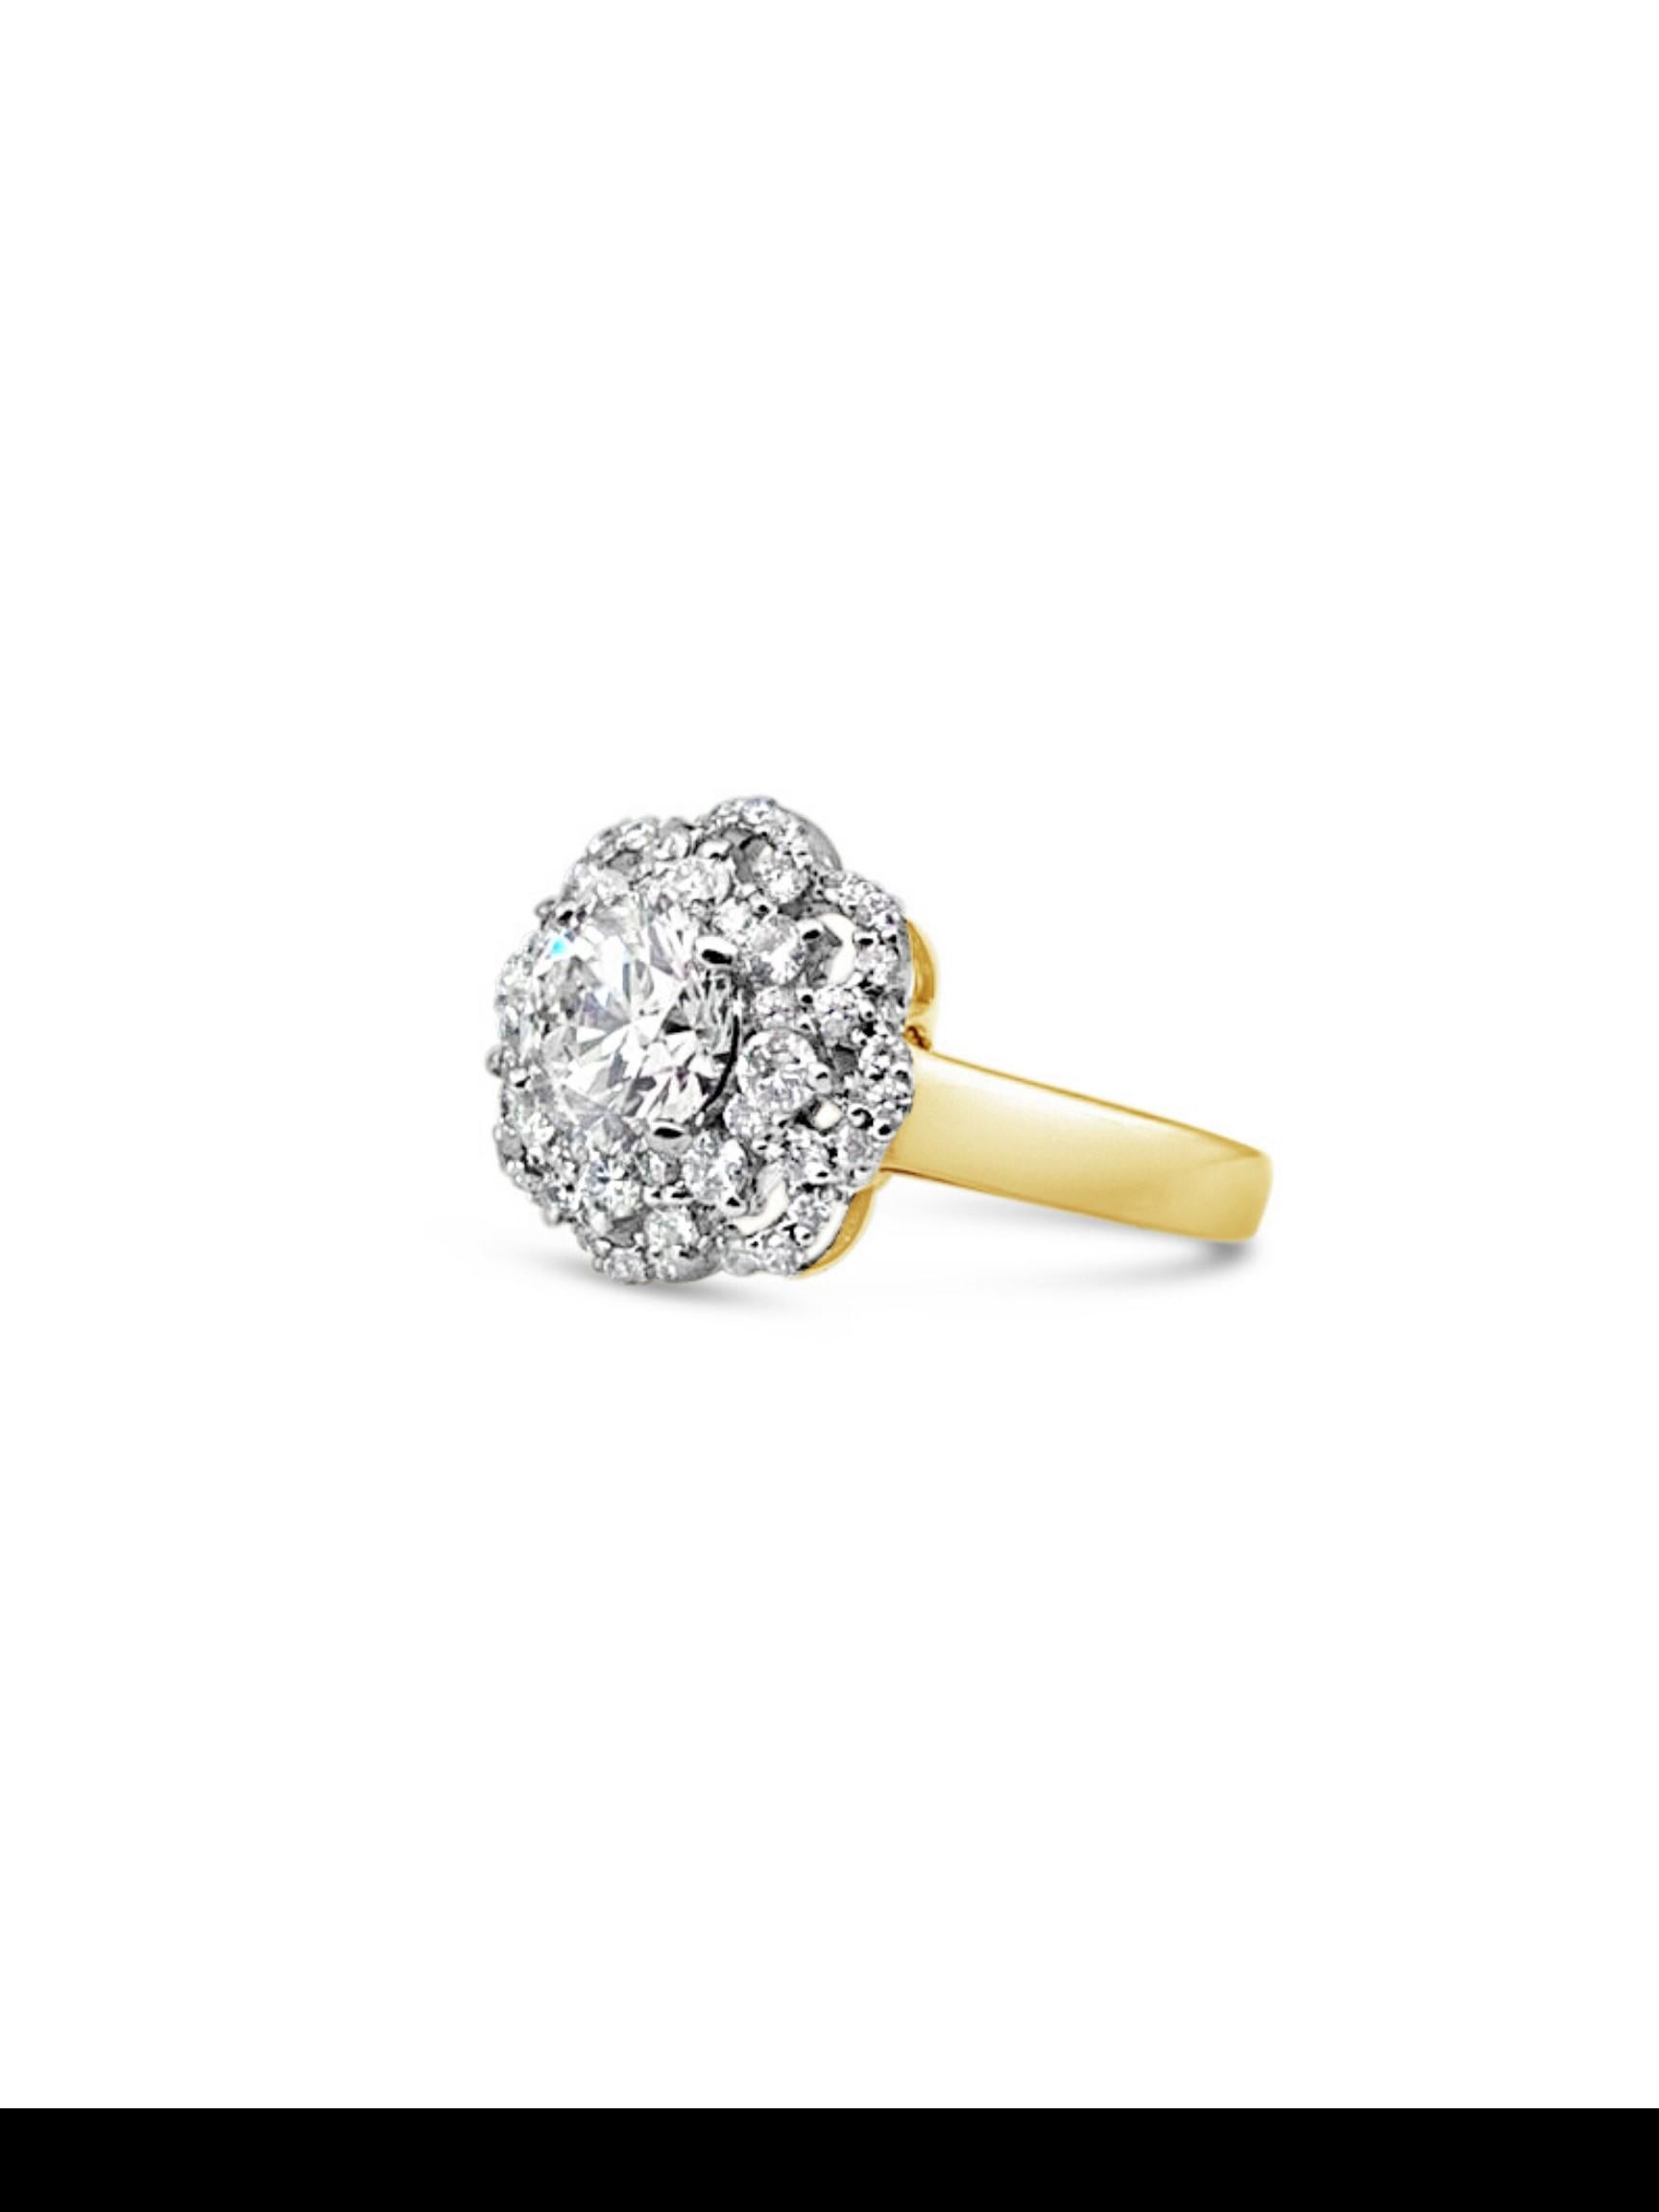 The Lona diamond ring features a 1.00 carat diamond solitaire center stone surrounded by a diamond encrusted gold band, made in a 18K yellow gold. A  beautiful accent ring, delicate yet dazzling, or that very special engagement ring for the future